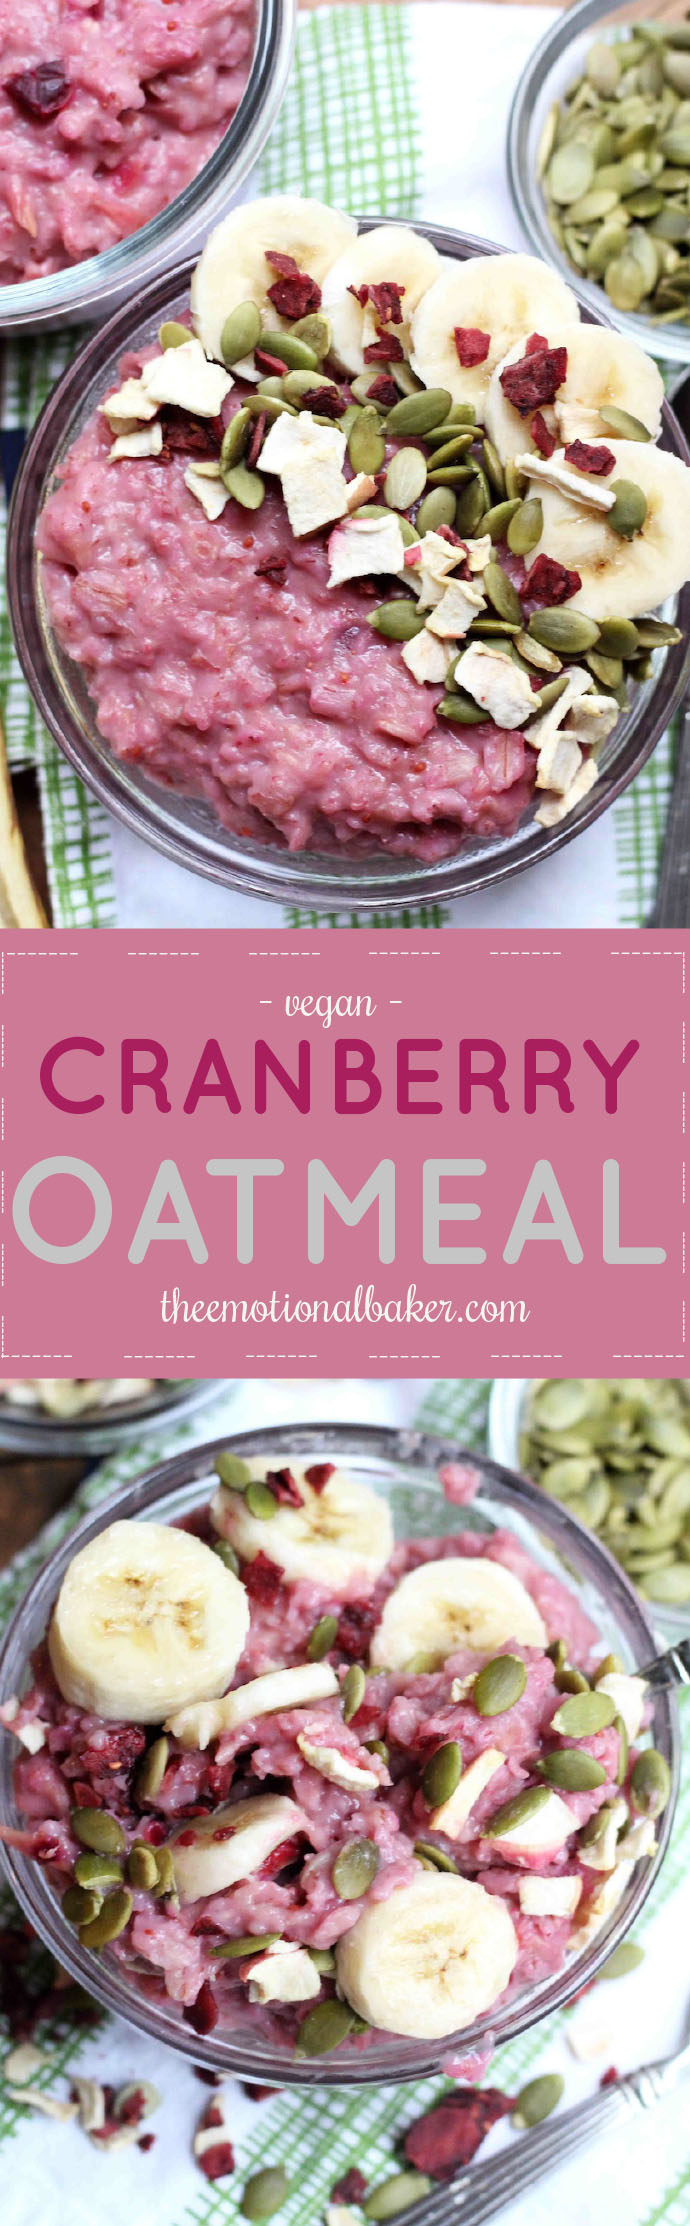 Wake up with a healthy bowl of cranberry oatmeal packed with antioxidants, potassium and fiber.